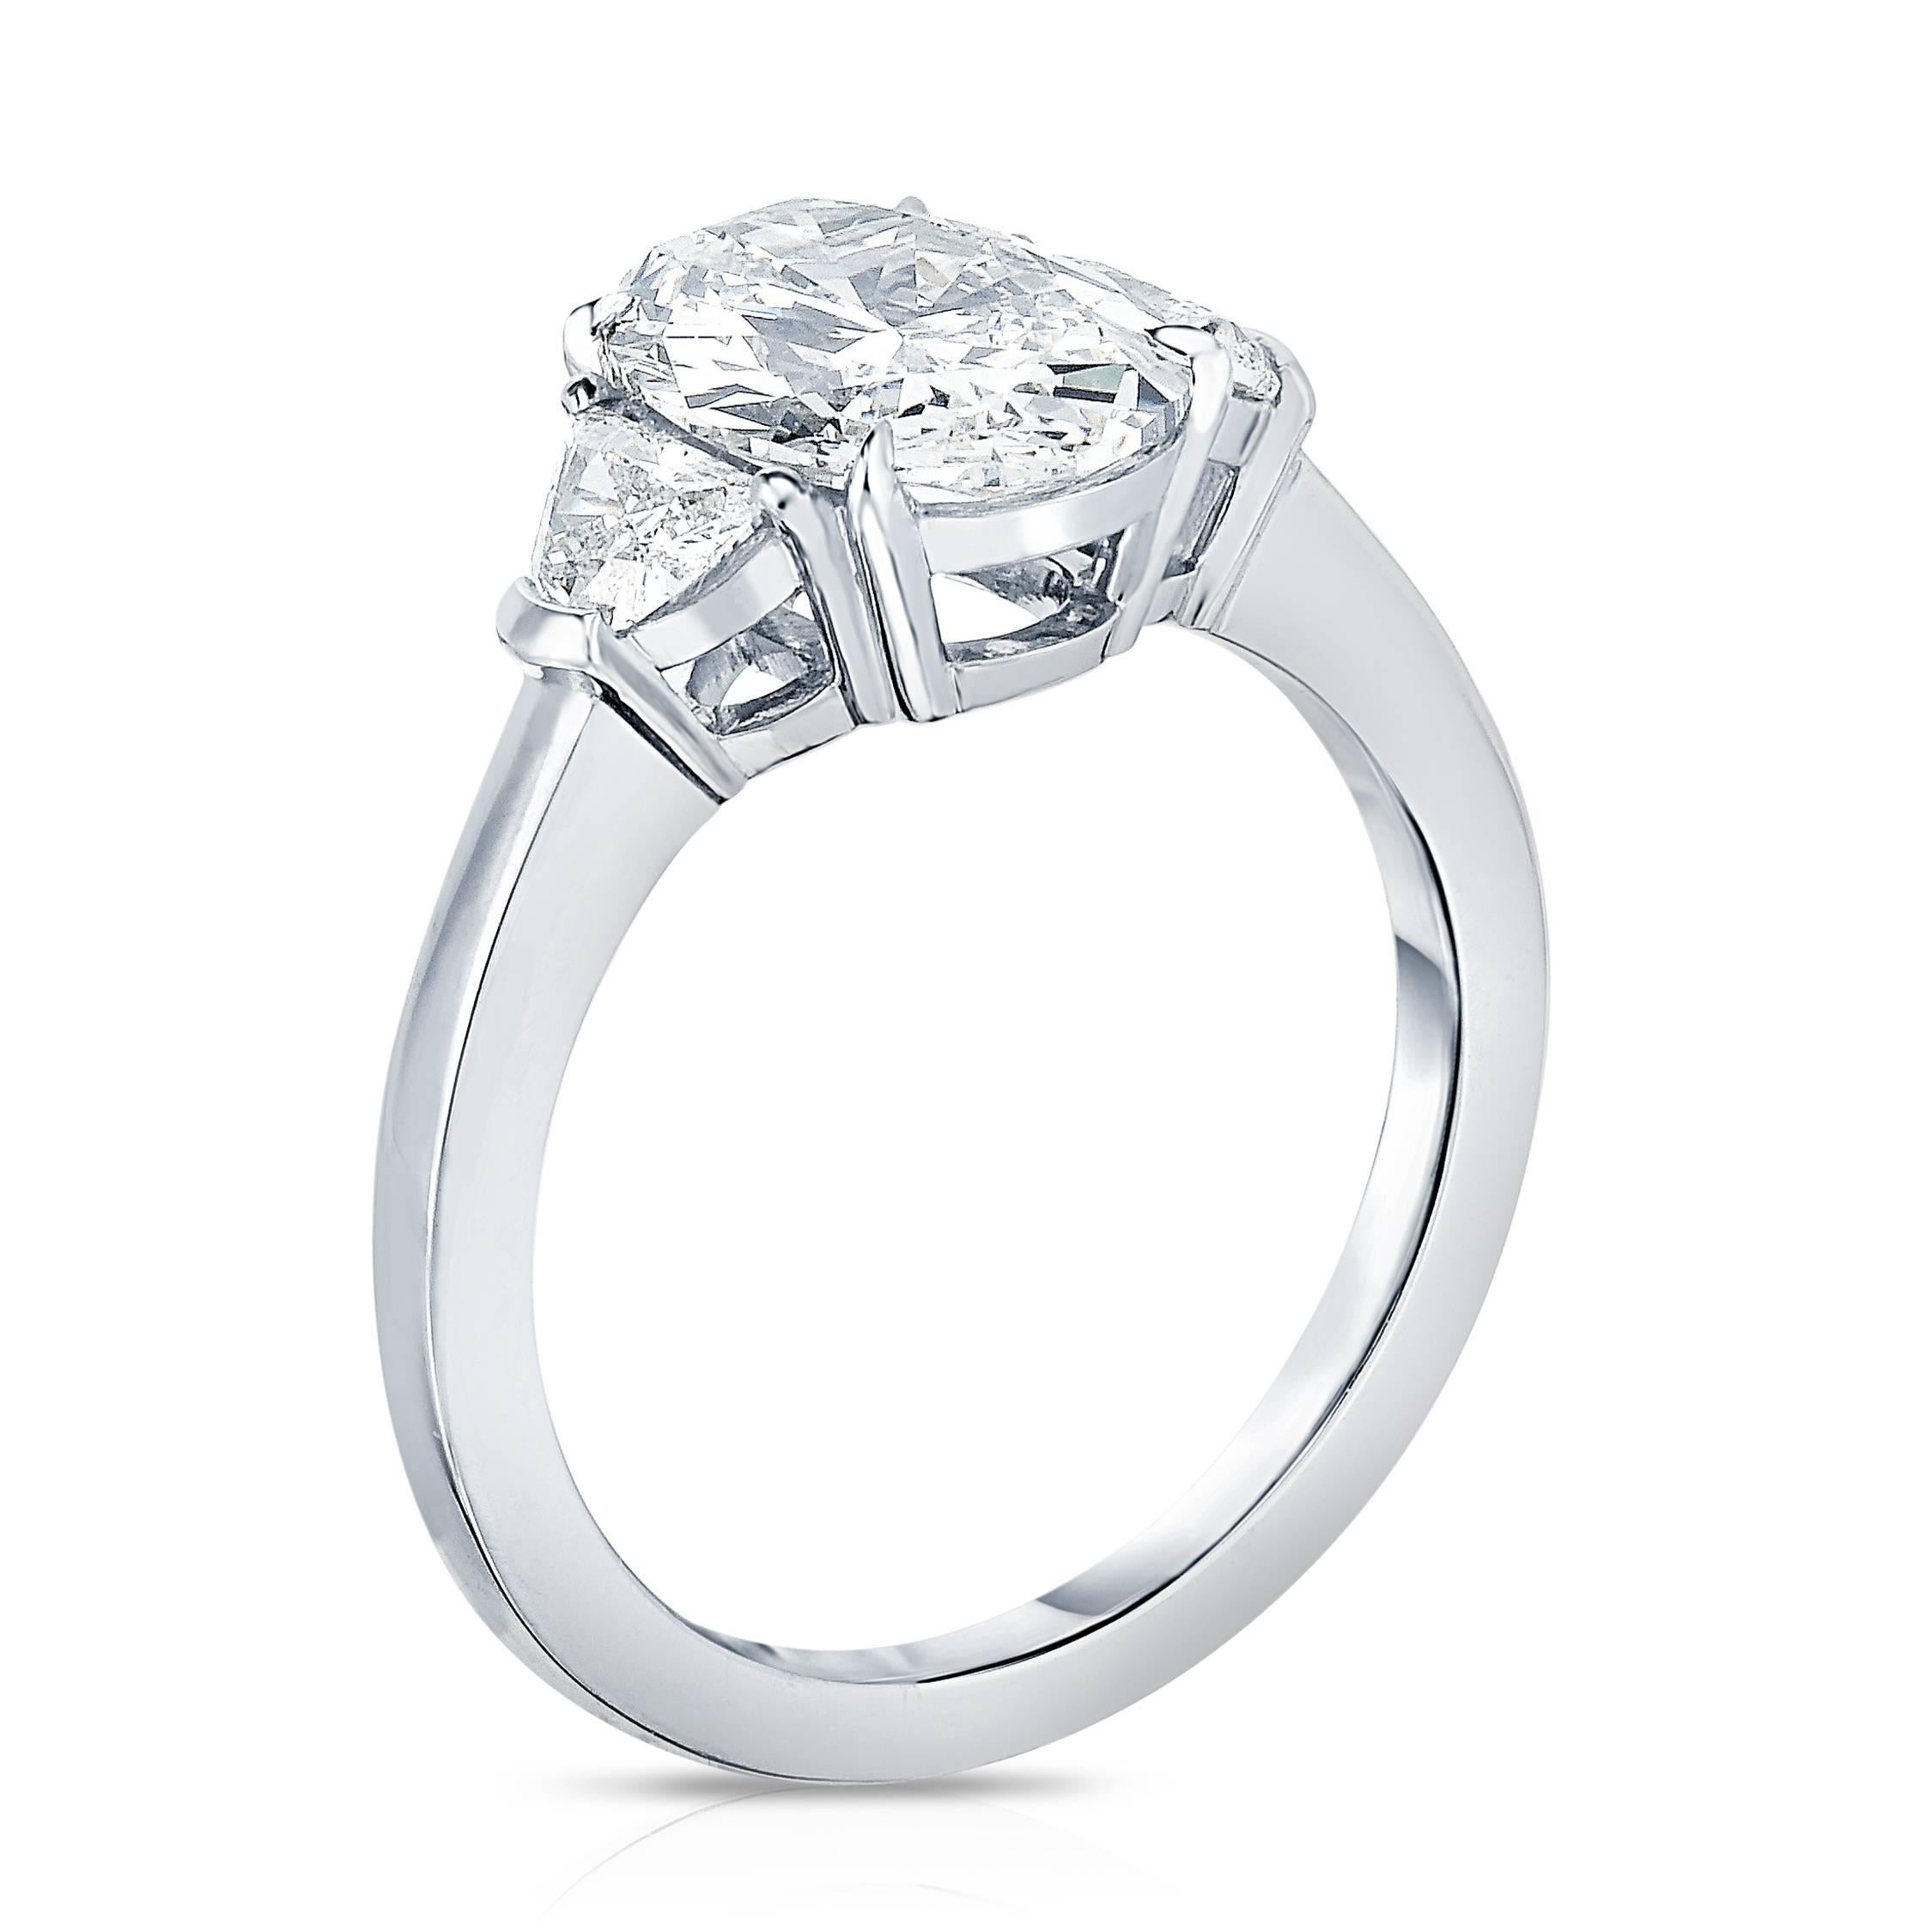 Marisa Perry Three Stone Engagement Ring in Platinum featuring a 2.10 carat Oval Diamond with G color and Internally Flawless - IF clarity. Featuring two G color VS1 clarity half moon side stones totaling 0.35 carats.  

This elegant engagement ring